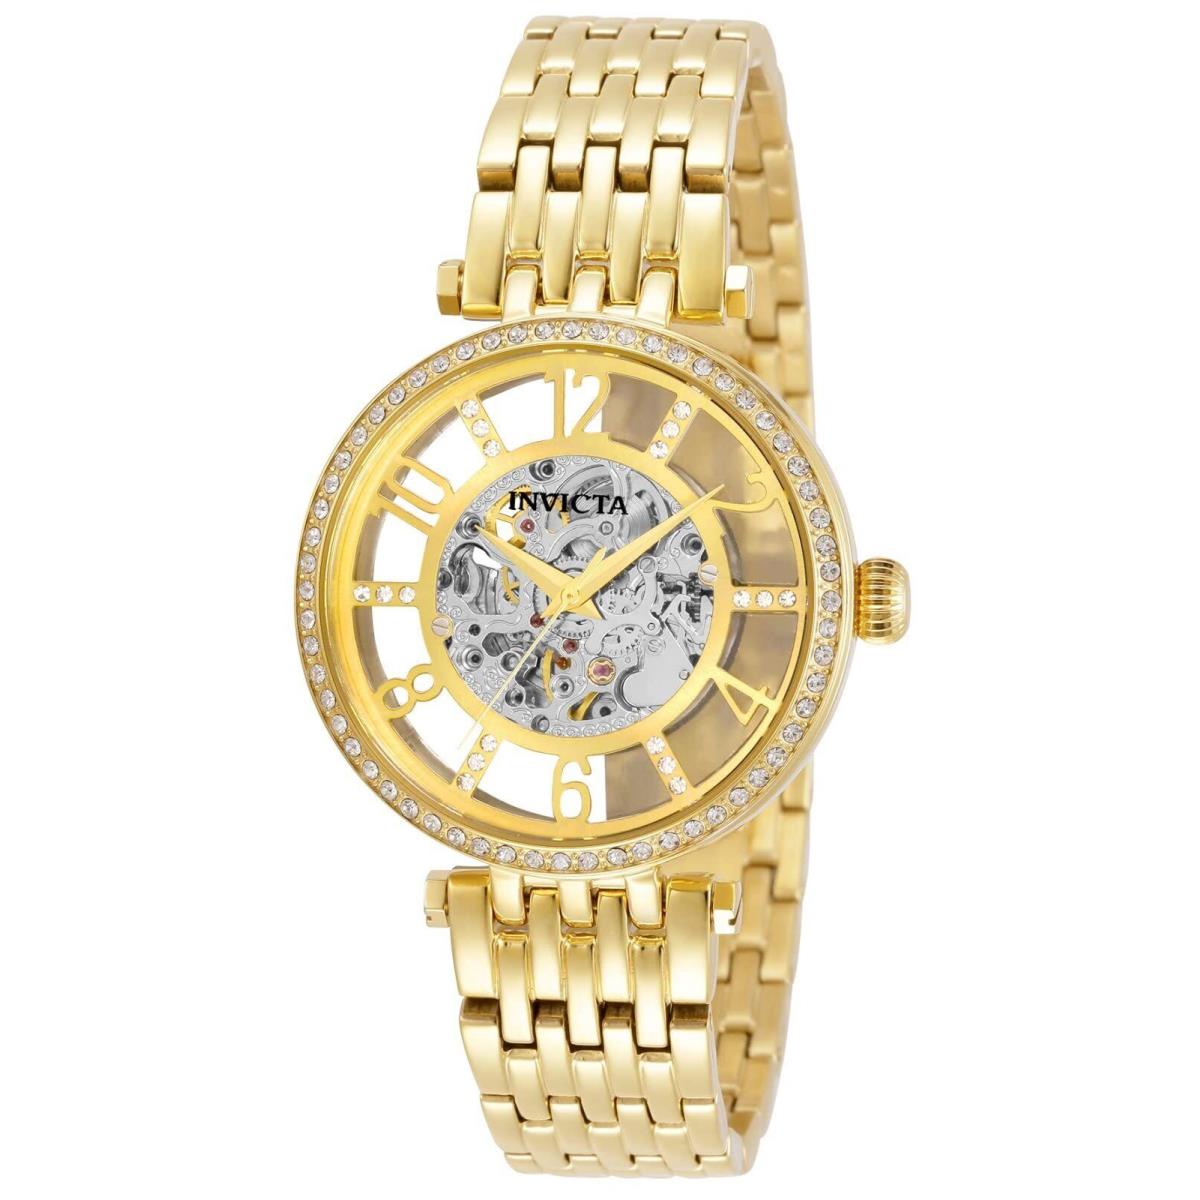 Invicta Women`s 32297 Objet D Art Automatic 3 Hand Gold Dial Watch - Gold